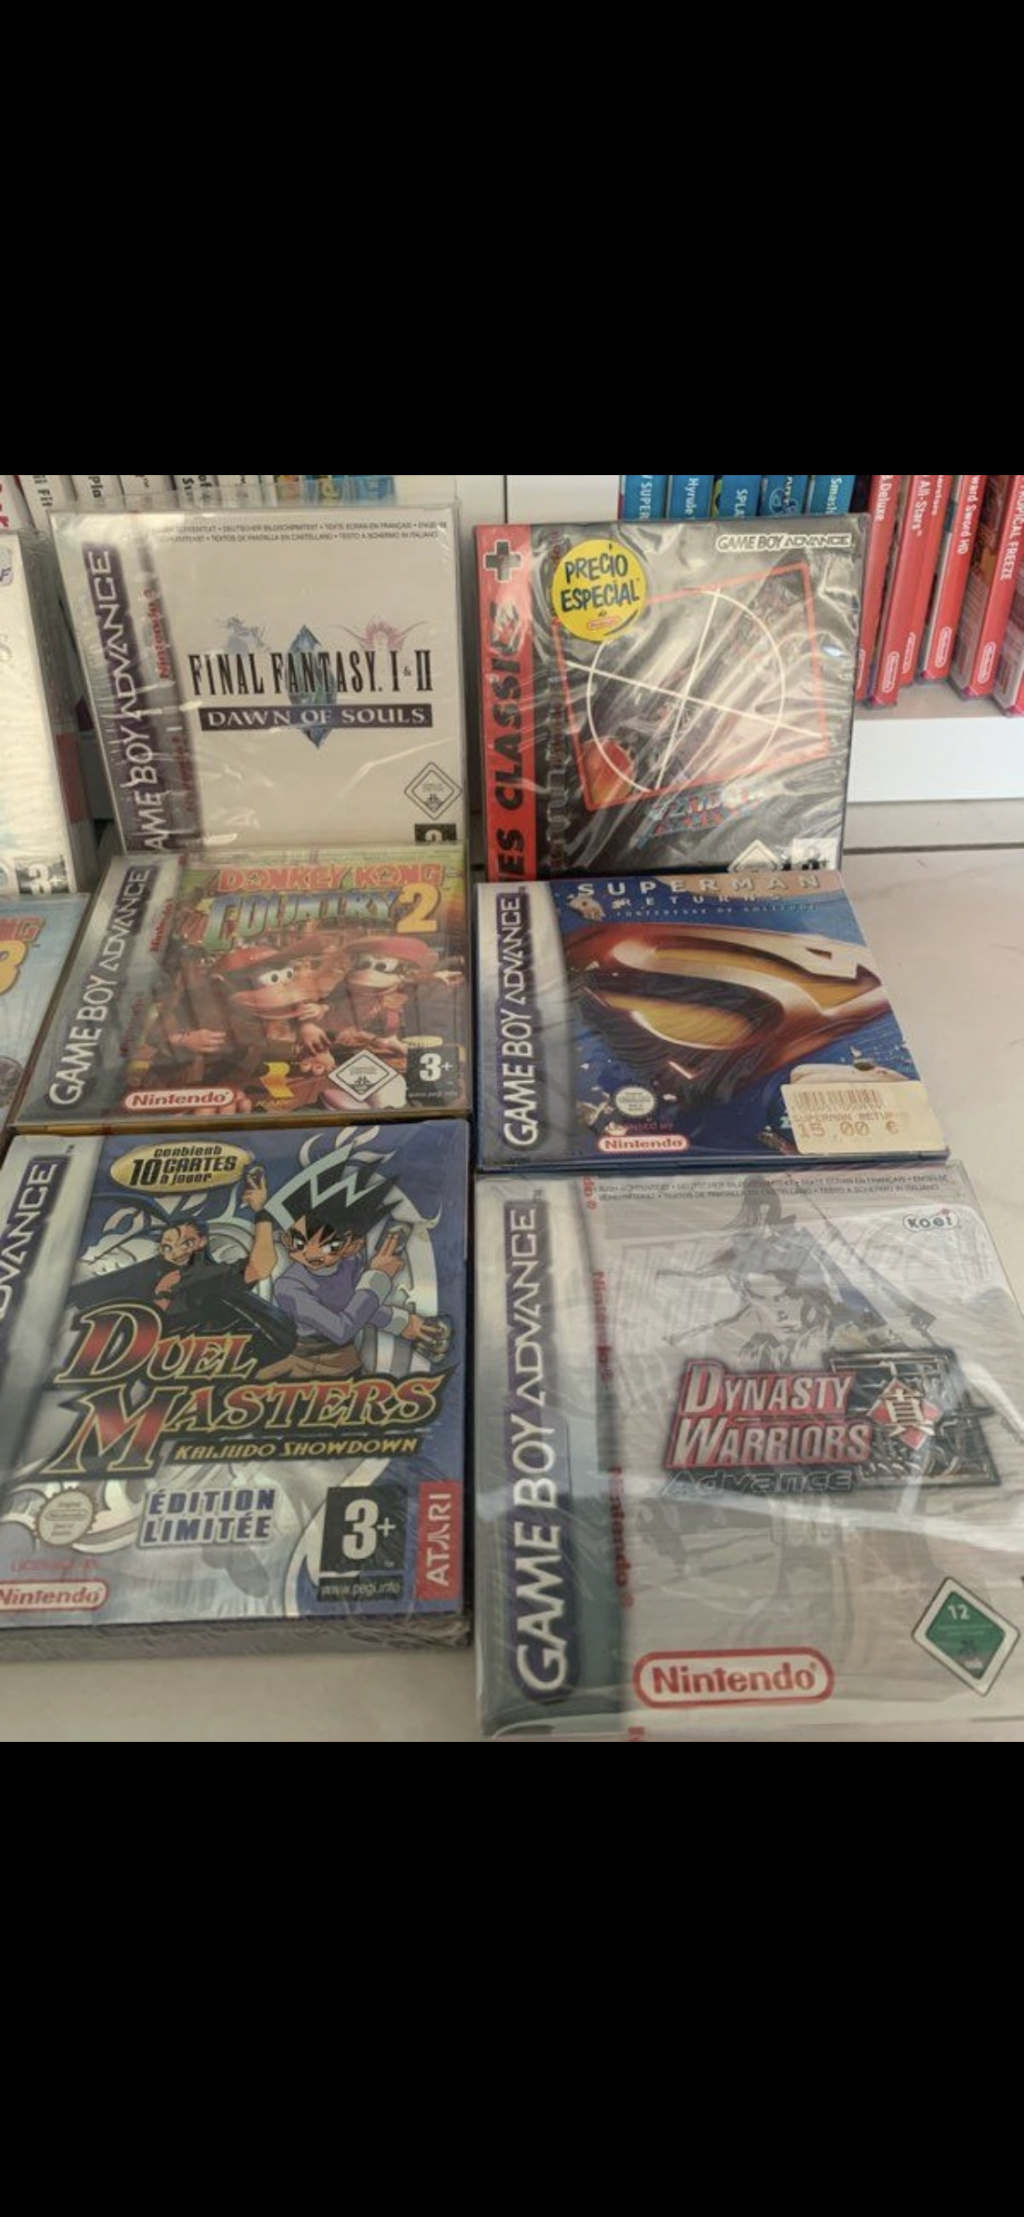 [VENTE] Resident Evil 64 complet + jeux gba neuf  Img_1313